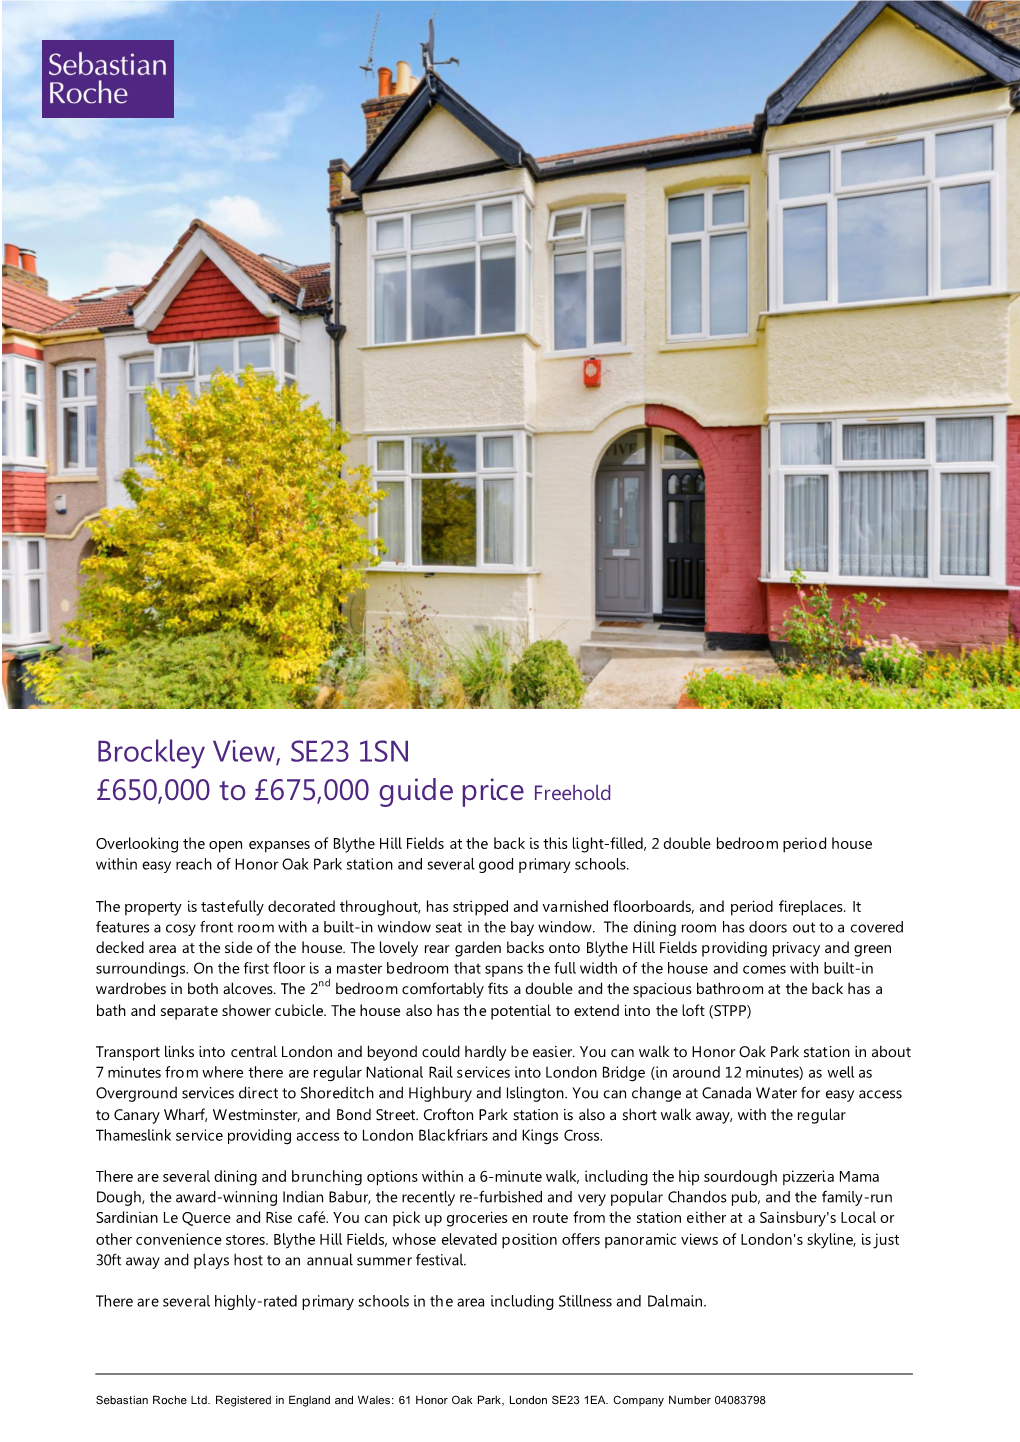 Brockley View, SE23 1SN £650,000 to £675,000 Guide Price Freehold